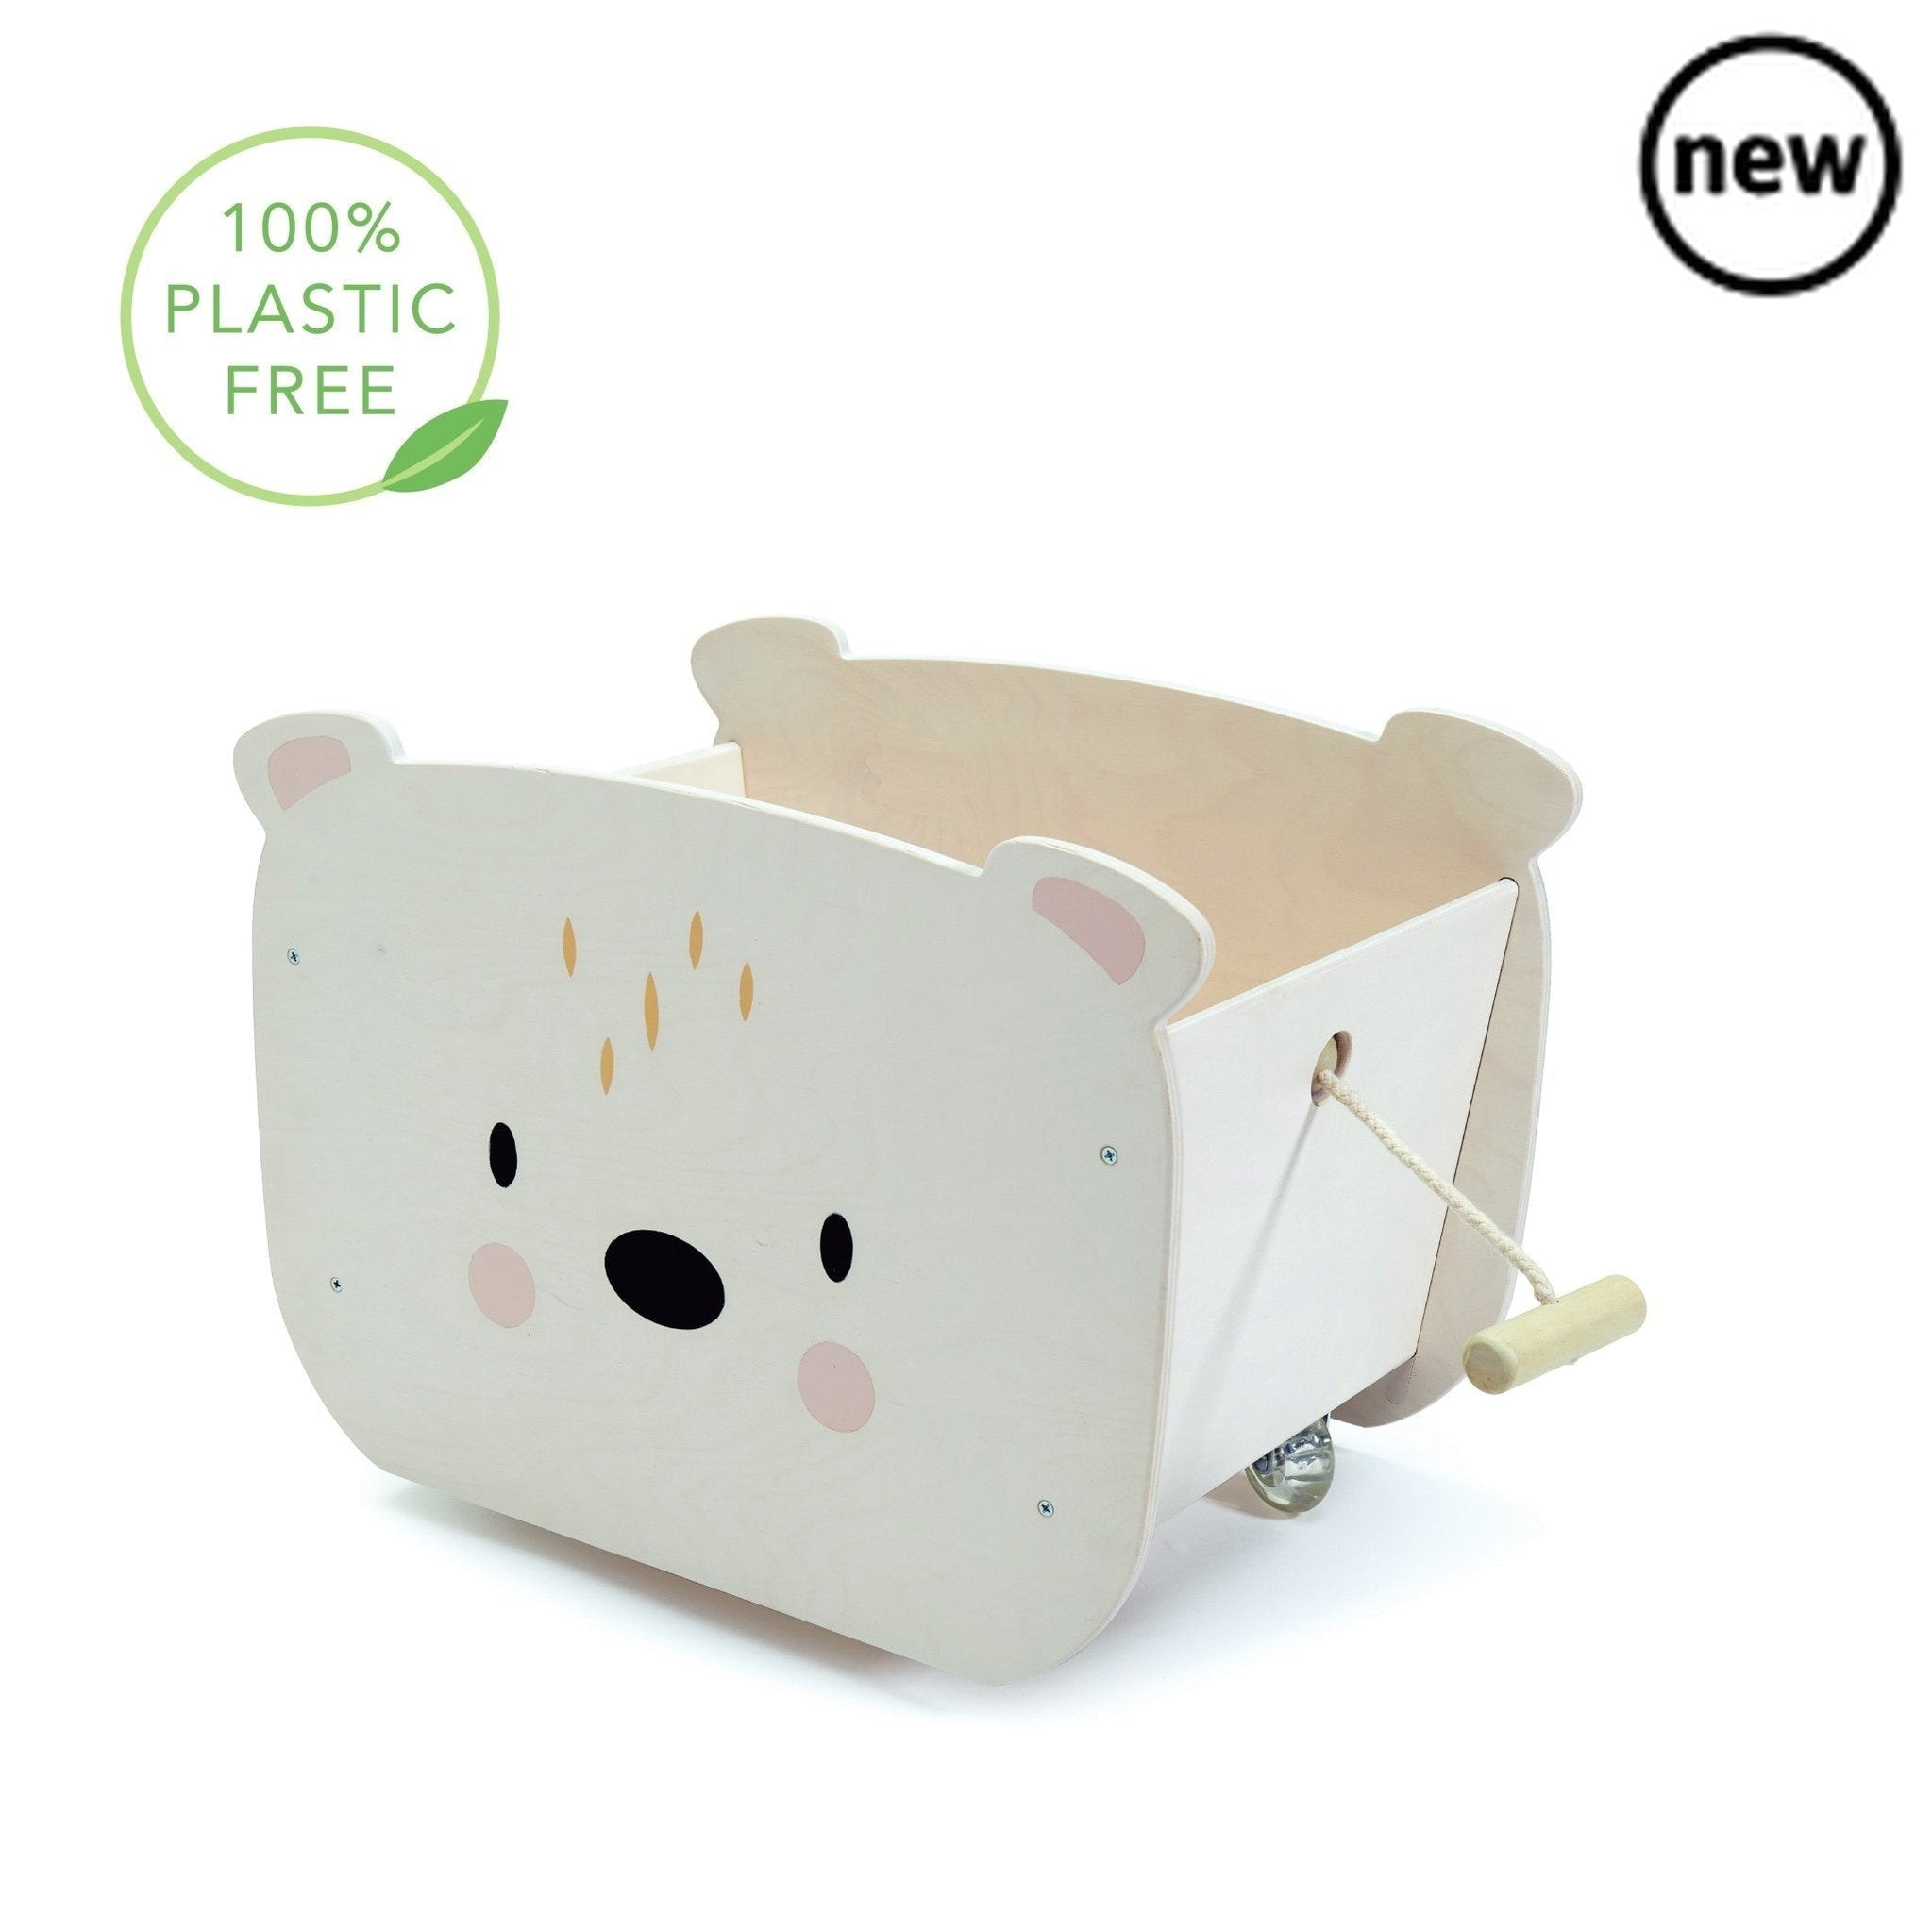 Tenderleaf Toys Pull Along Bear Cart, A wooden toy box on 4 wheels! Pull along this handsome polar bear and fill it with your favourite toys and books. Keep your room tidy with this sturdy, stylish toy or book box. Self assembly required. Suitable for children age 3+ Product dimensions: 0.36 x 0.55 x 0.07 meters, Tenderleaf Toys Pull Along Bear Cart,Wooden Toys,Tenderleaf, 